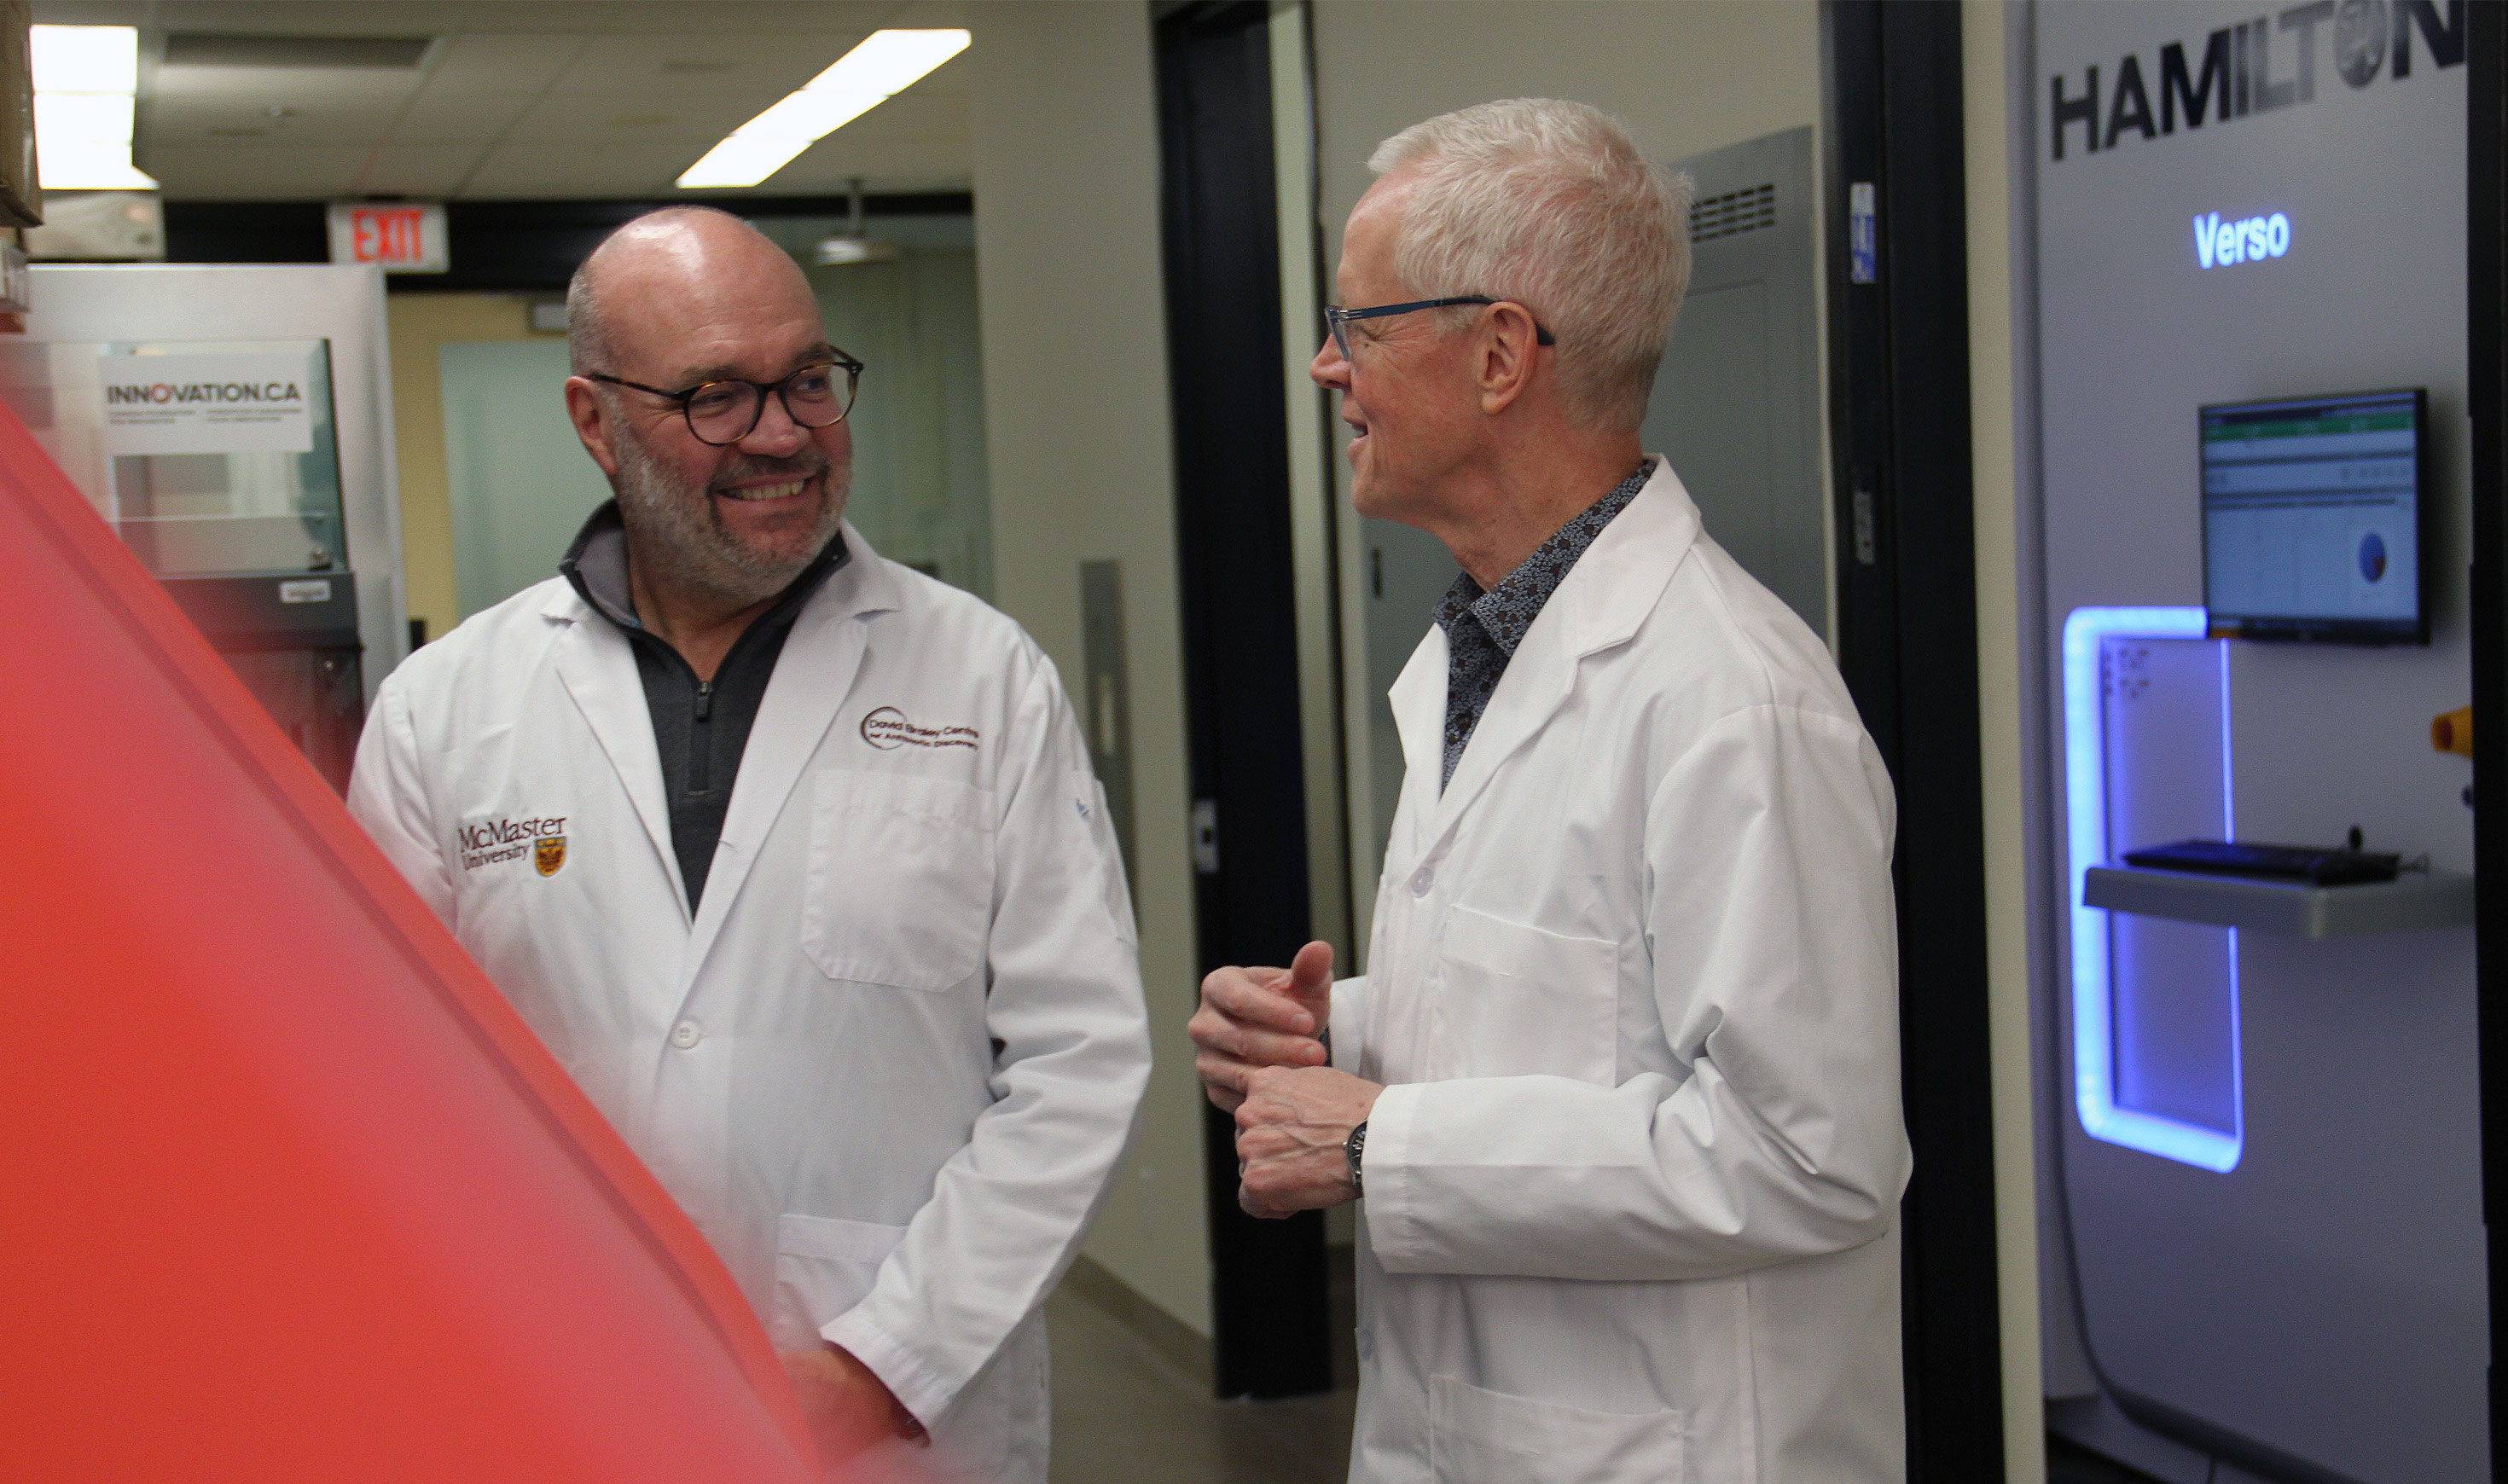 Gerry Wright and Eric Brown, wearing lab coats in a lab, smile at each other.